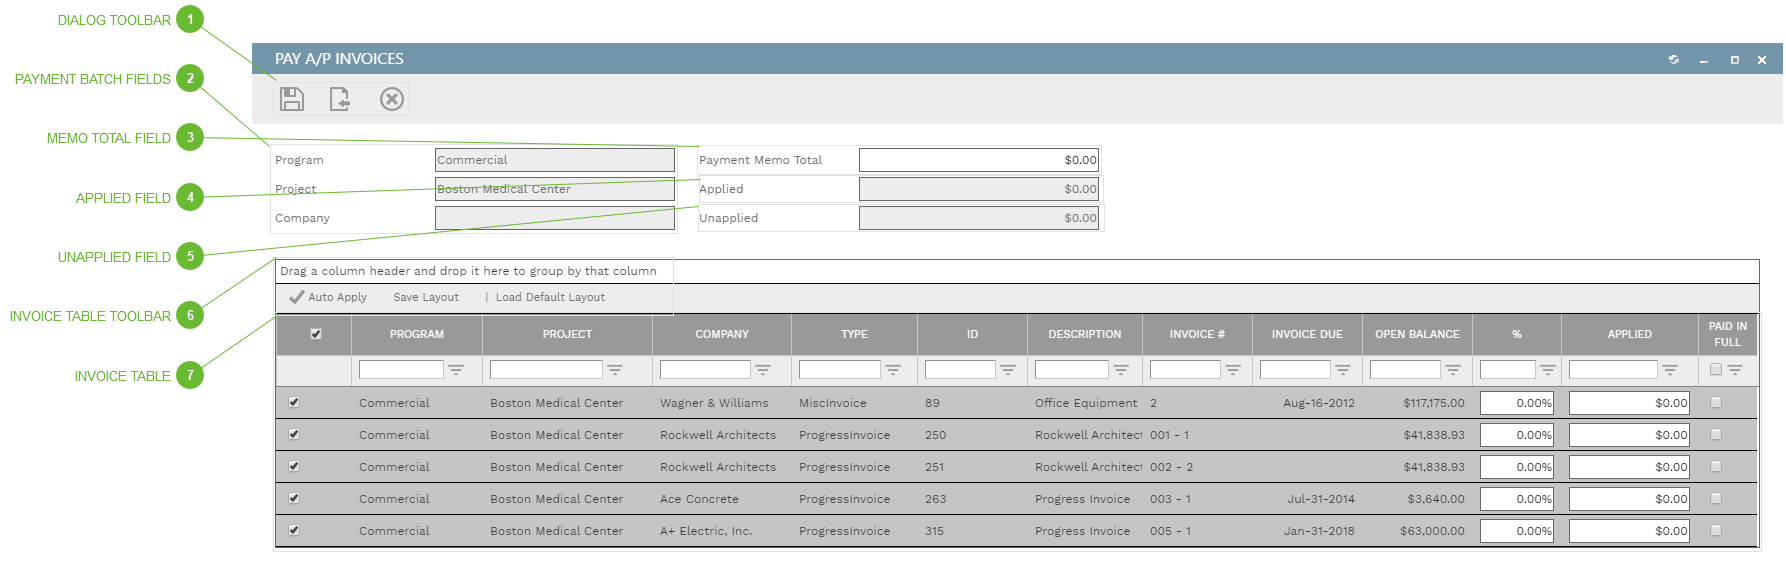 Pay Invoices Dialog